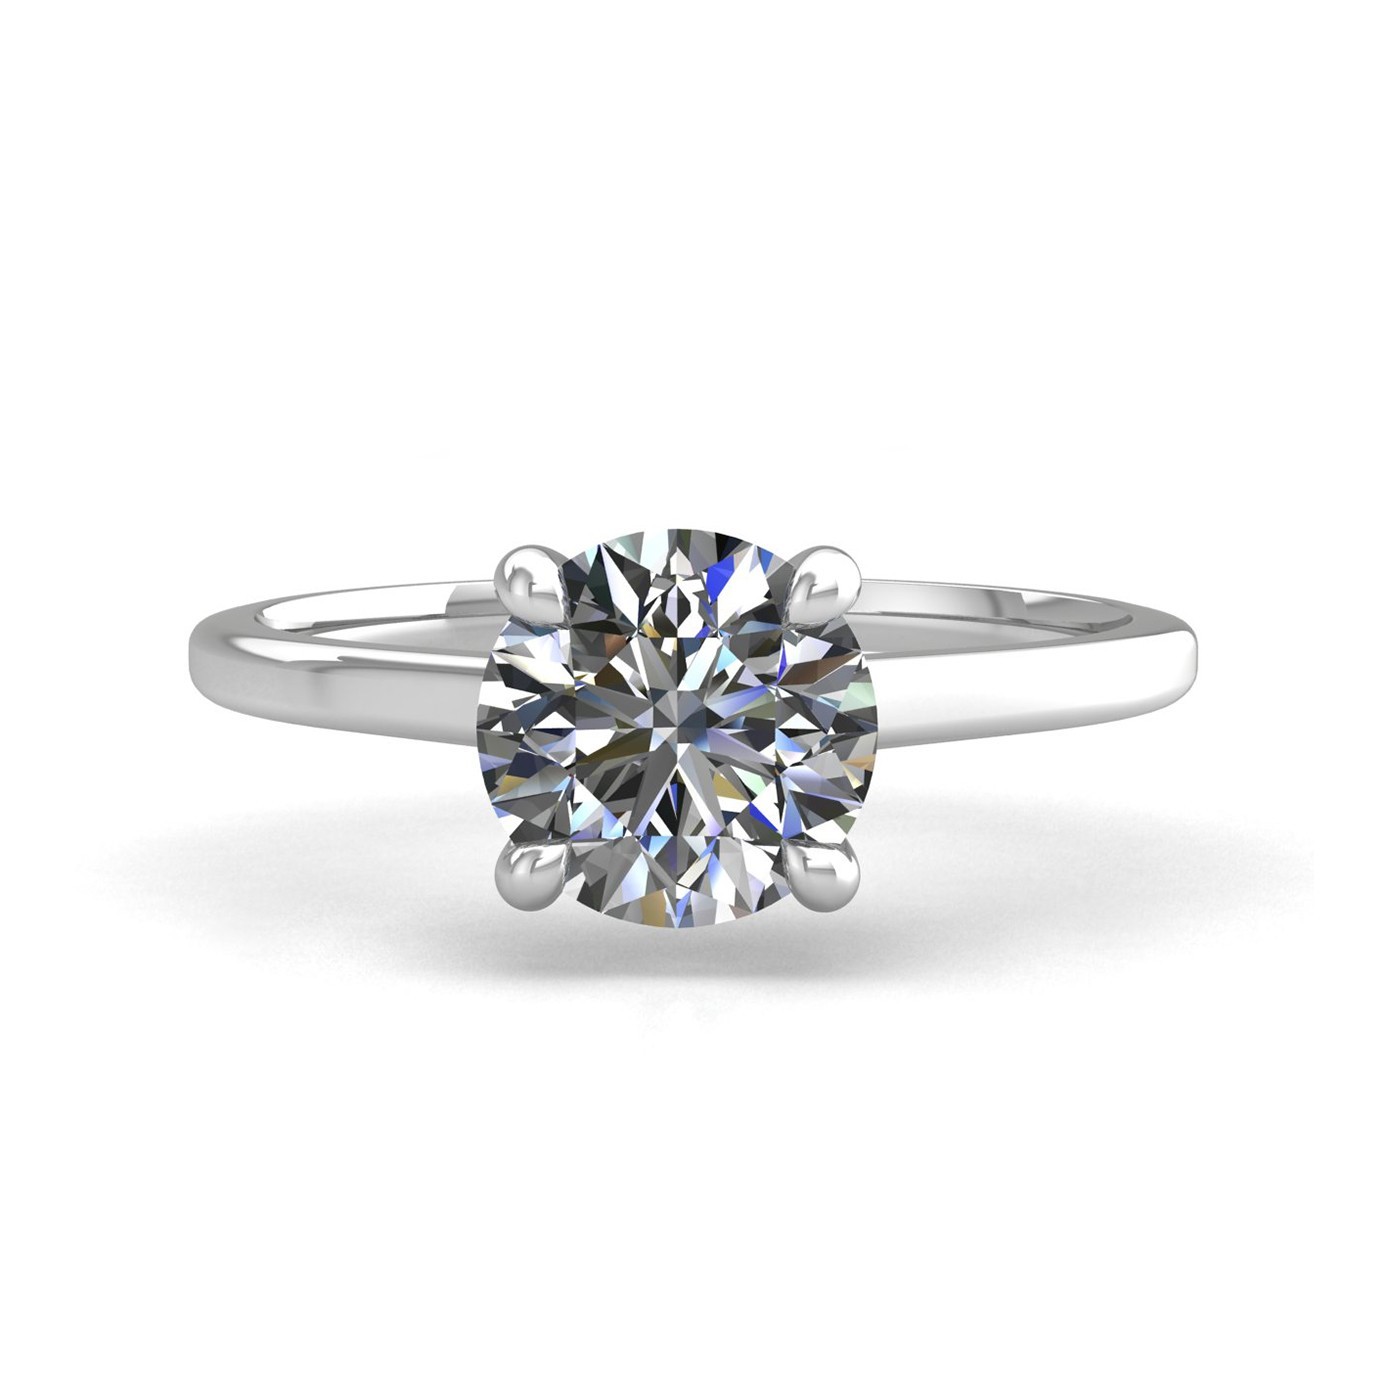 18k white gold 0,50 ct 4 prongs solitaire round cut diamond engagement ring with whisper thin band Photos & images